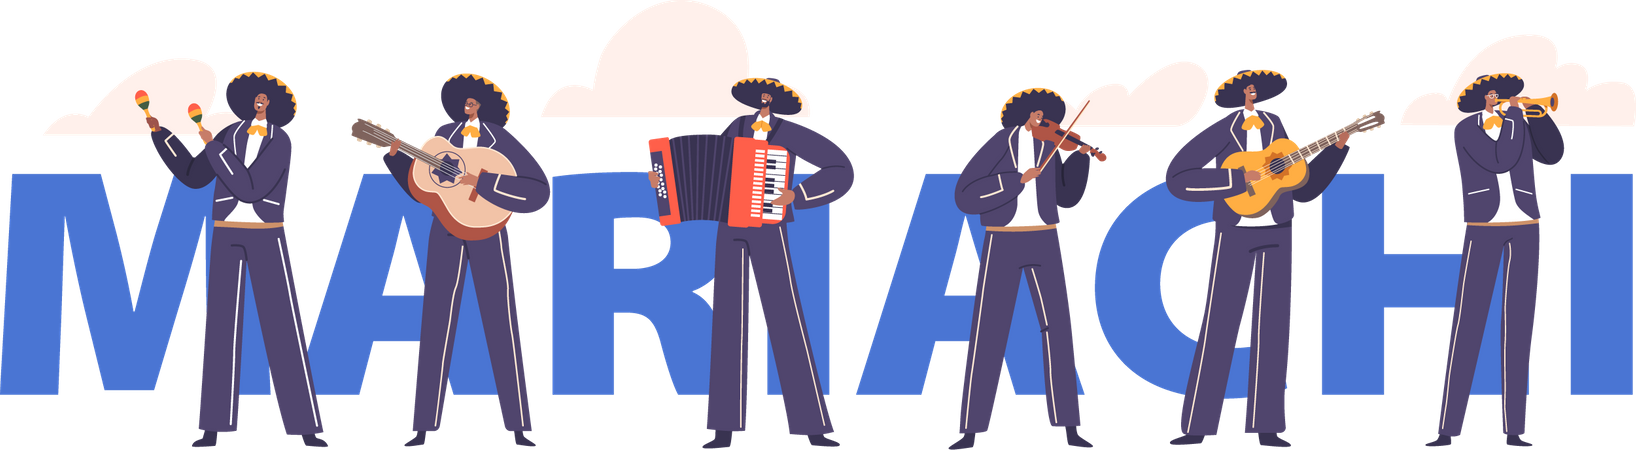 Mariachi musicians playing traditional mexican music  イラスト